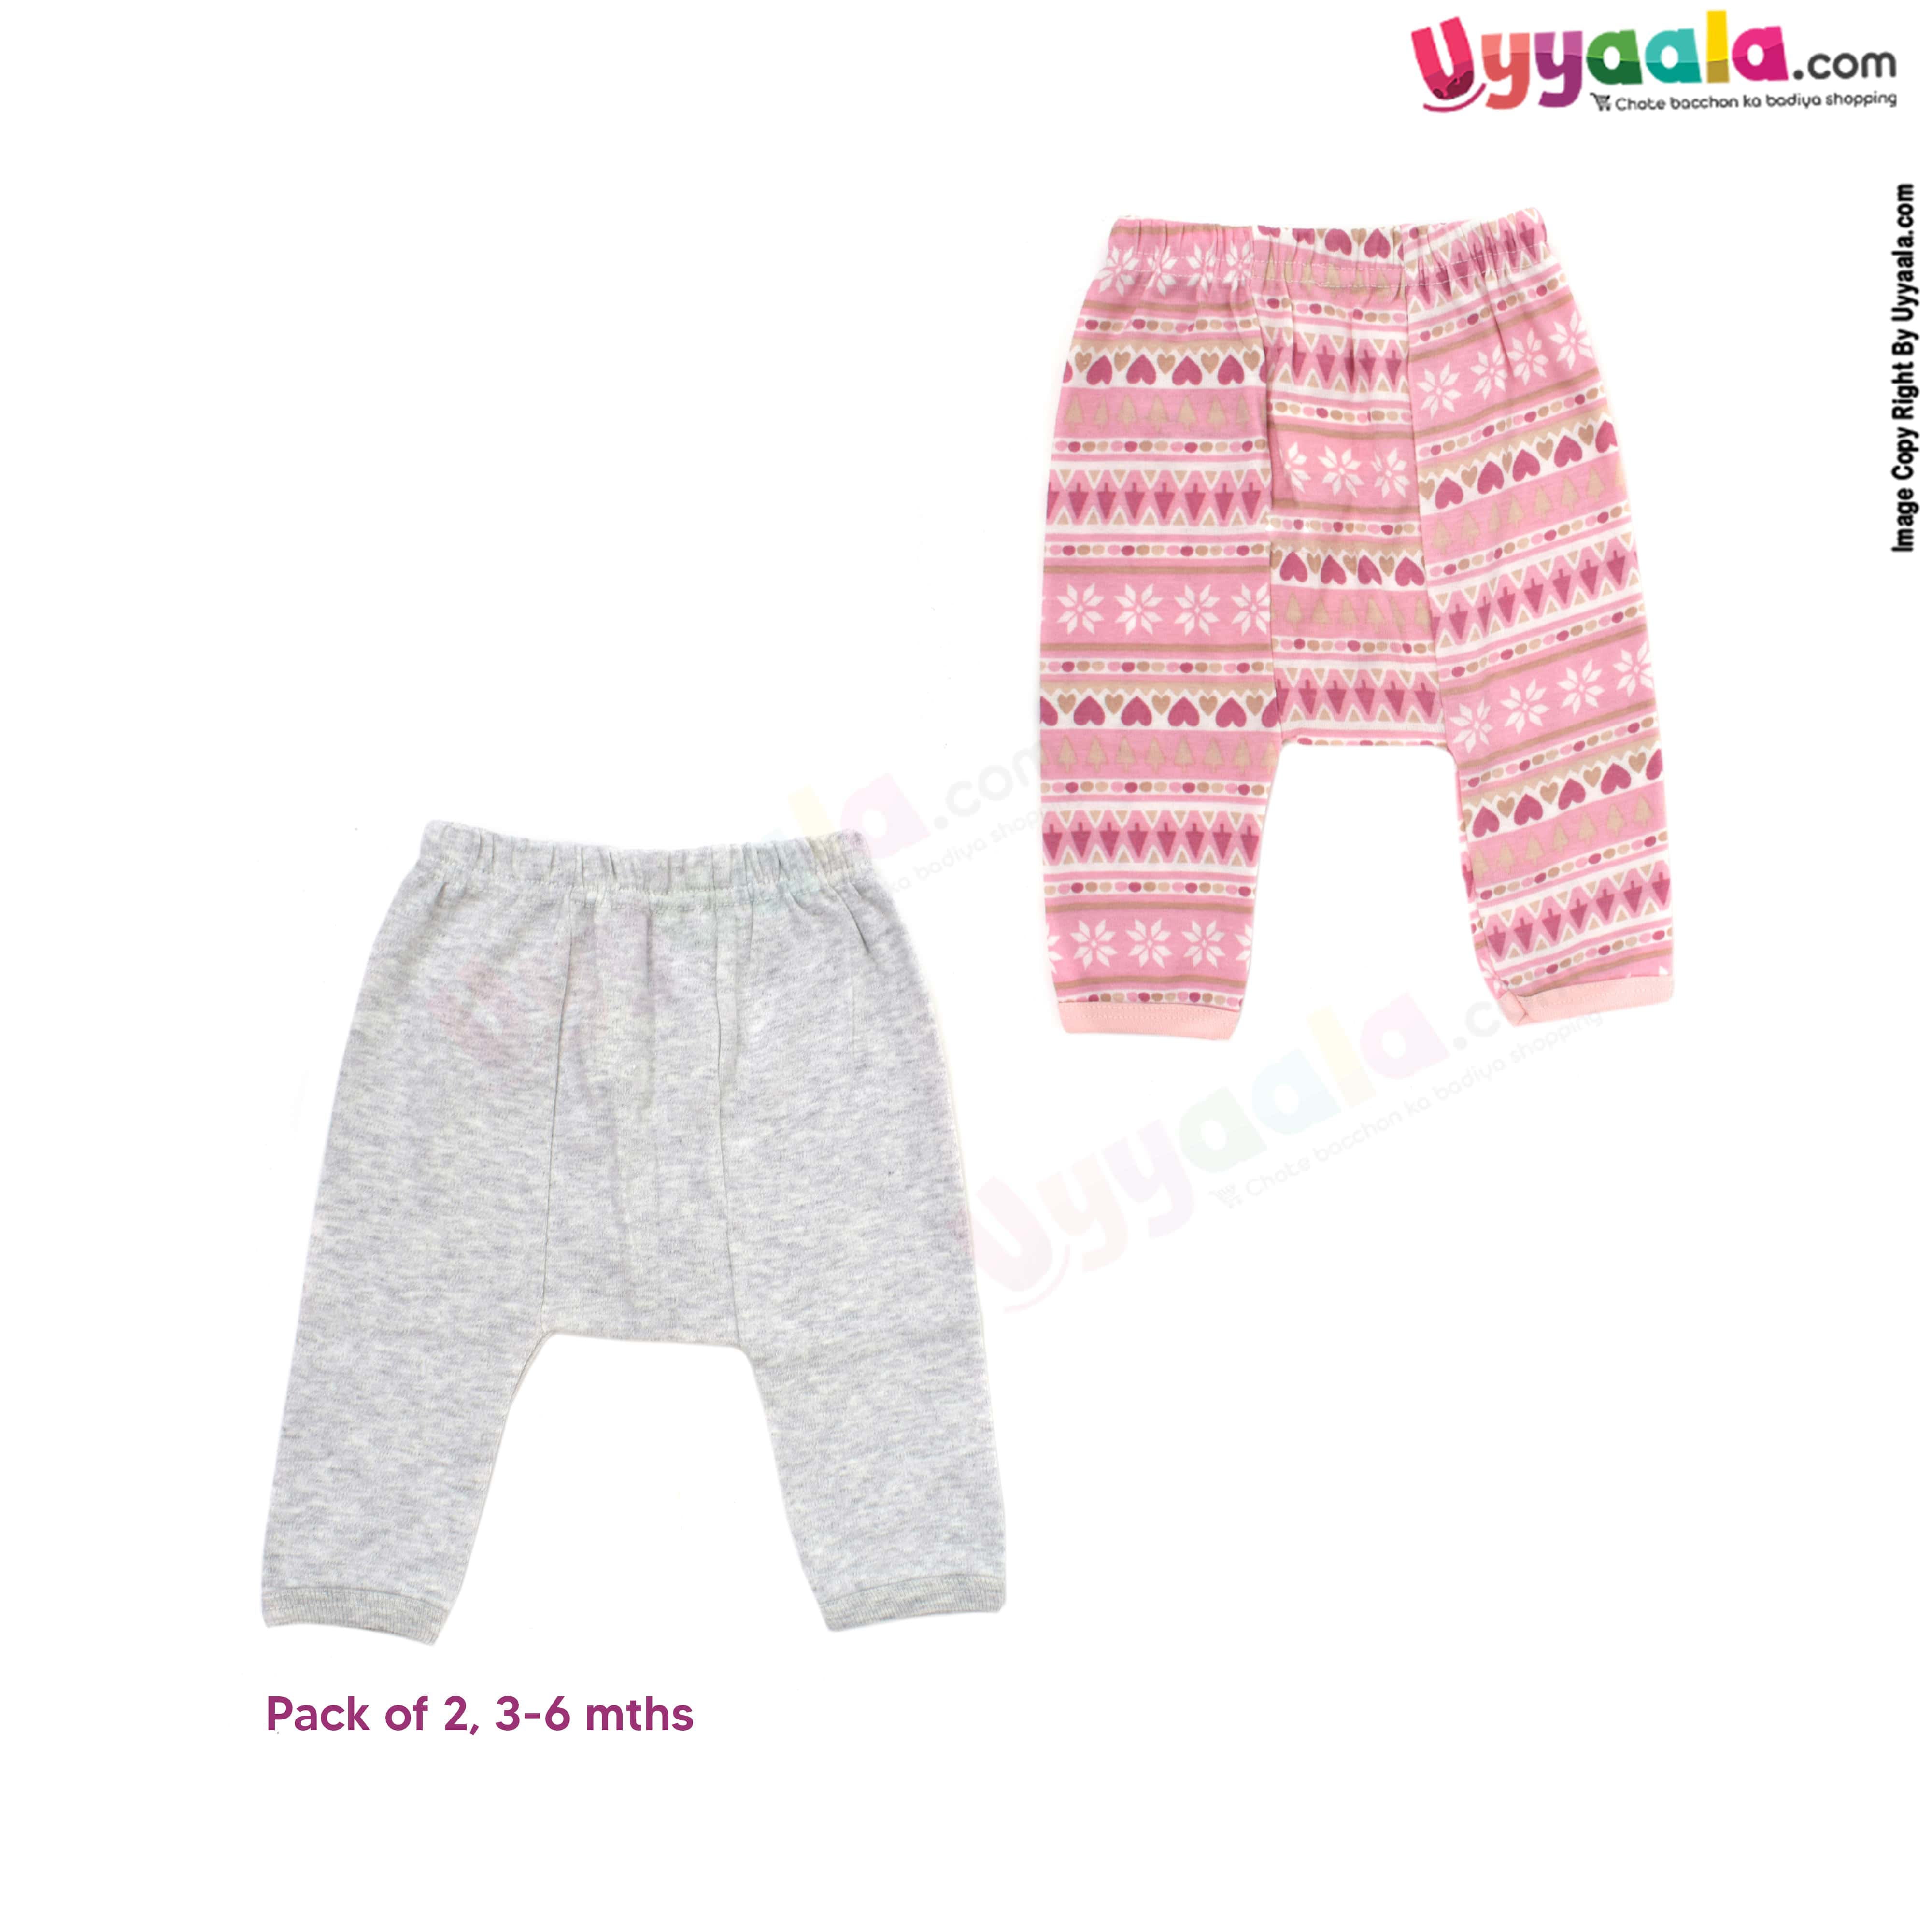 PRECIOUS ONE diaper pants 100% soft hosiery cotton pack of 2 - gray & pink with assorted prints (3-6m)